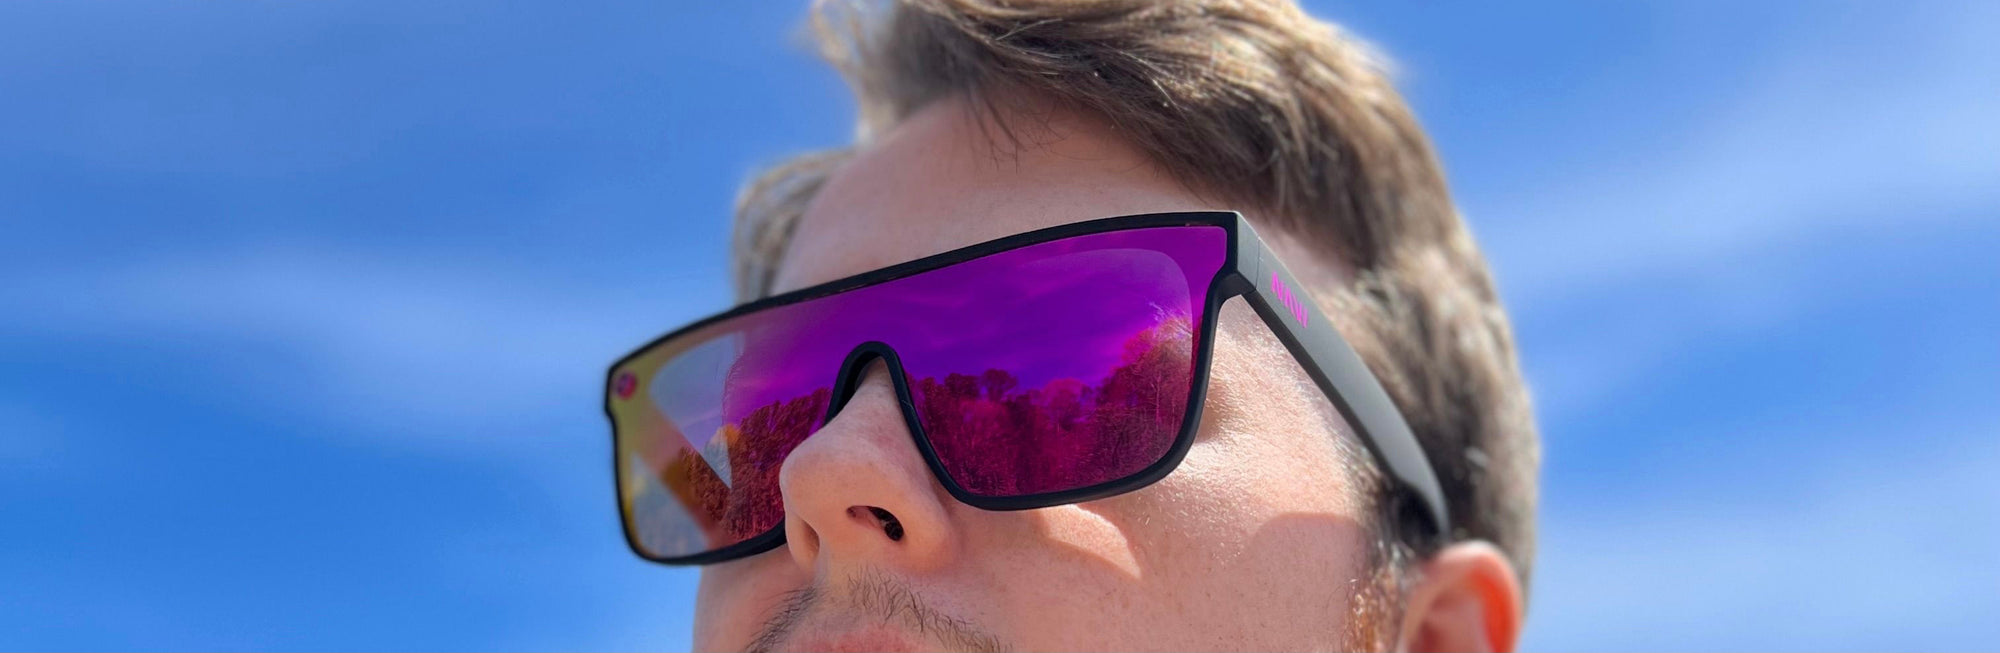 How to Choose Sunglasses for Water Sports